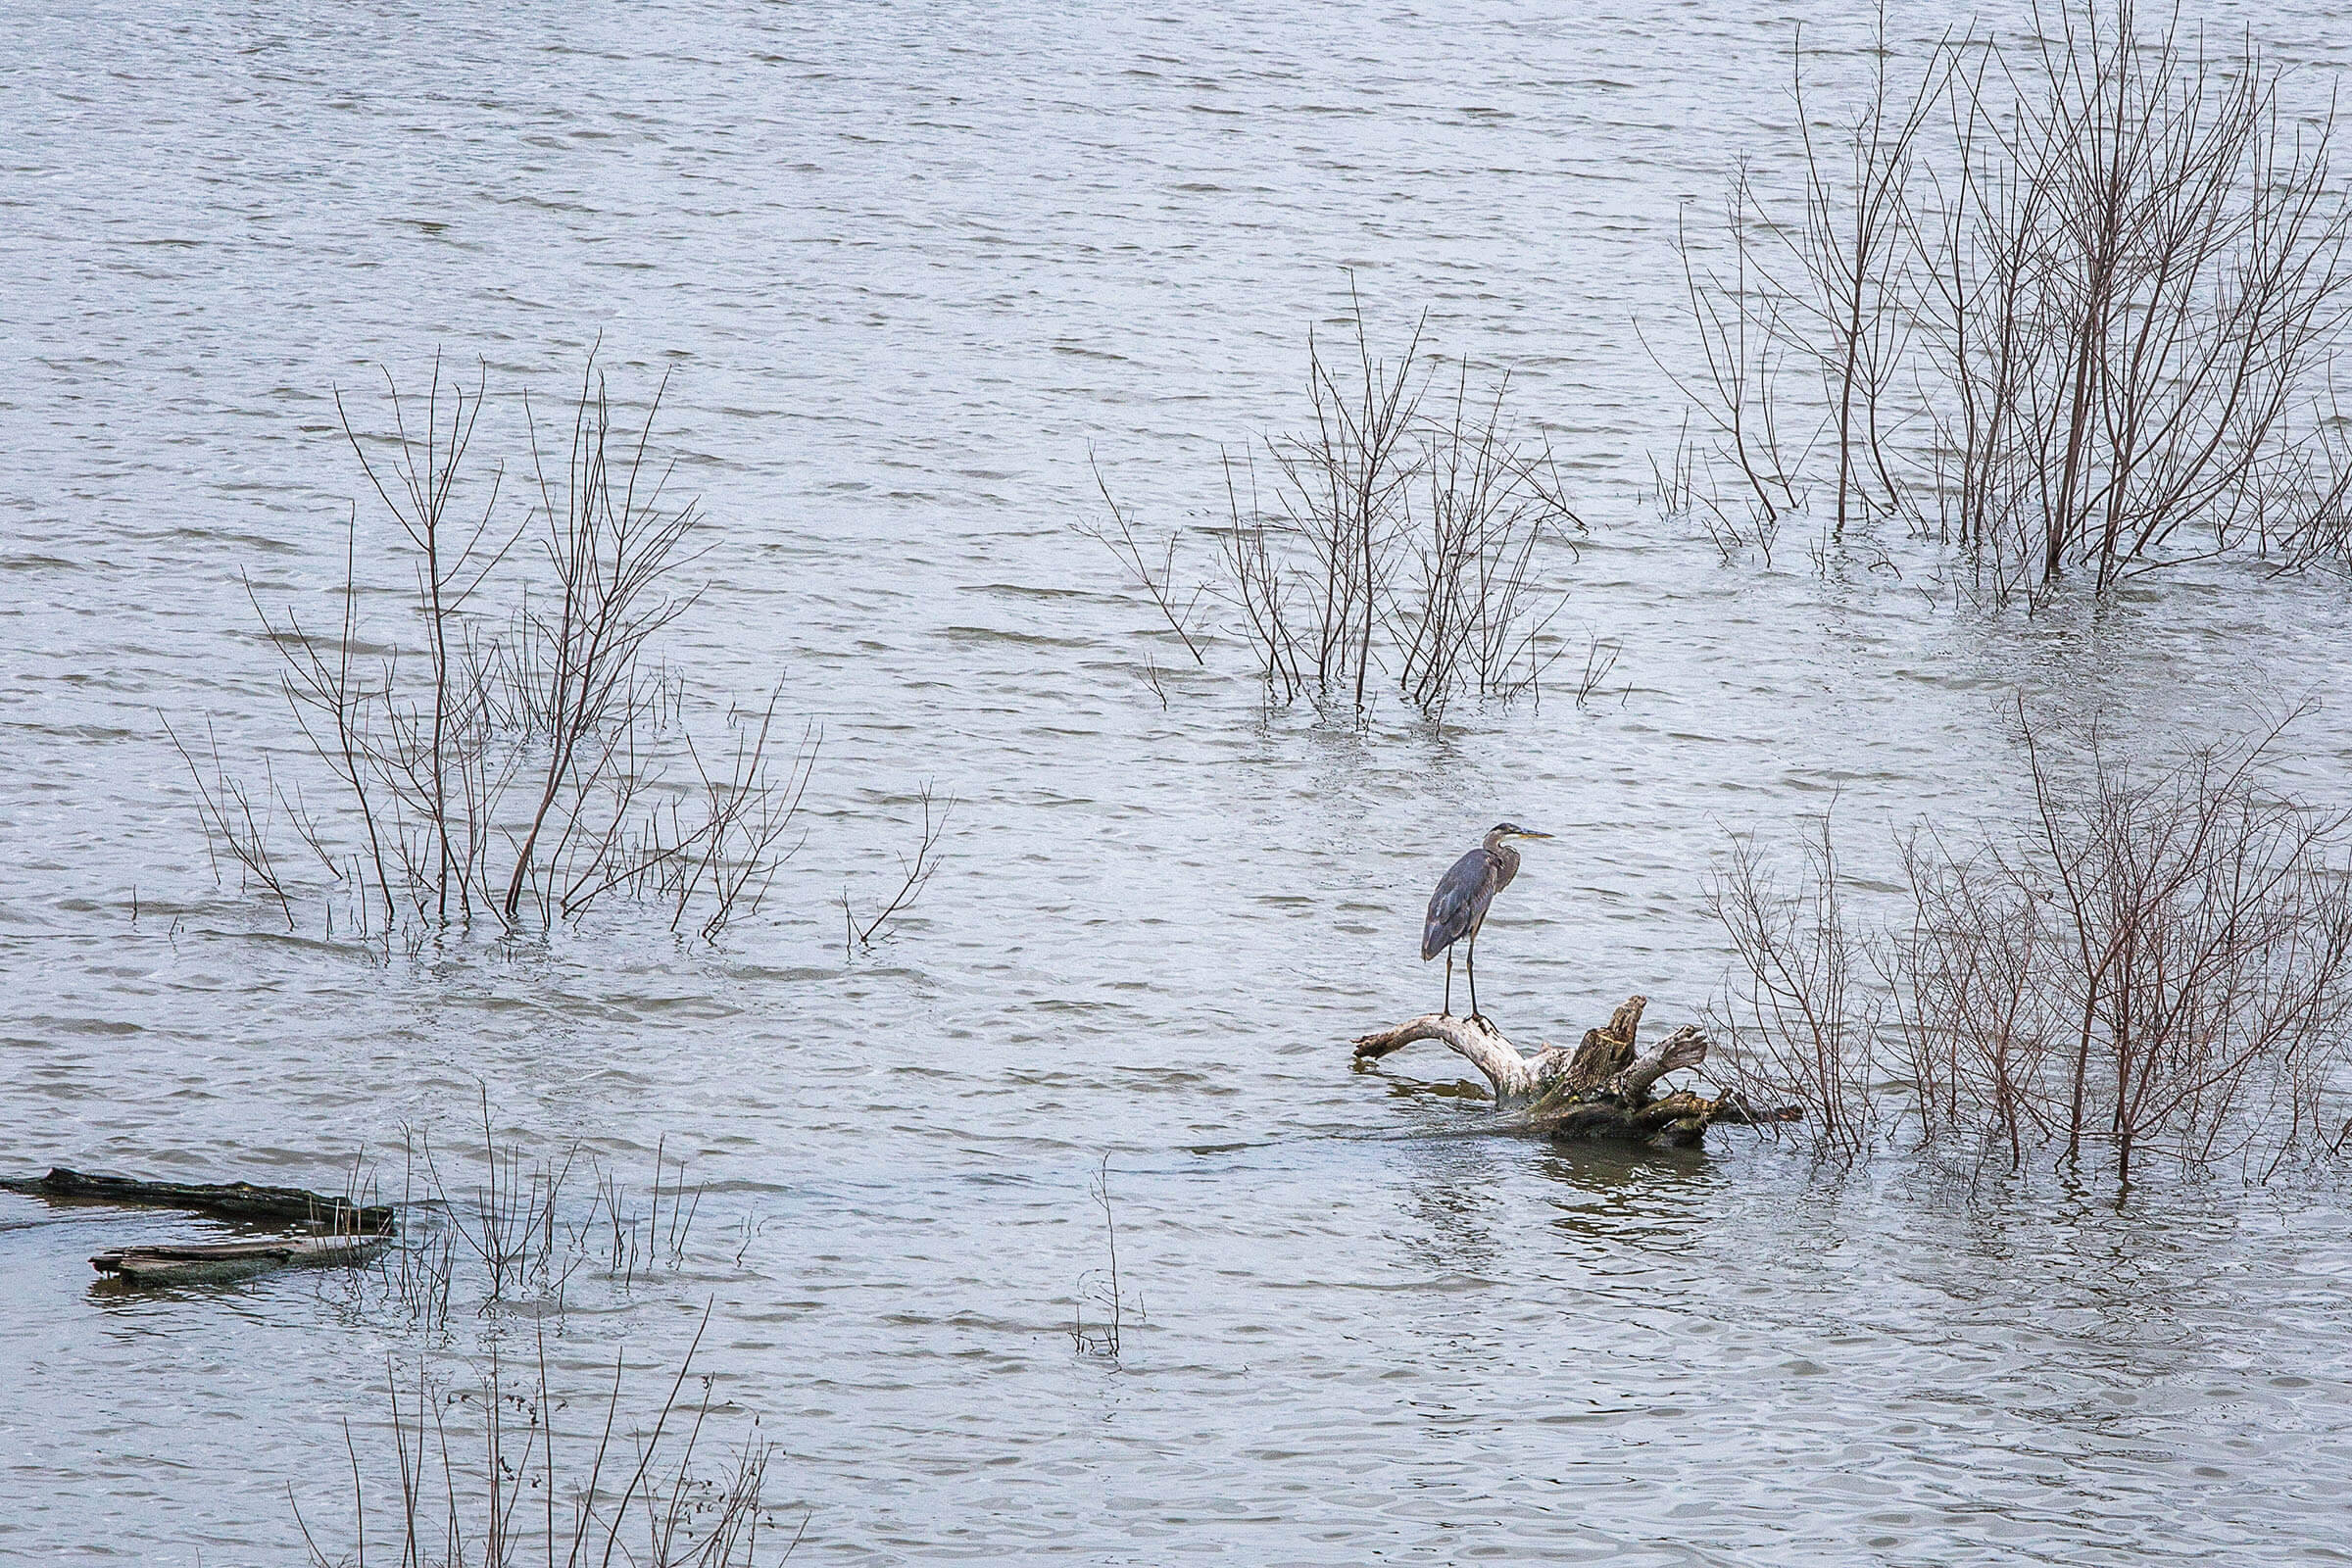 A large bird sits on a piece of wood surrounded by murky water and reeds